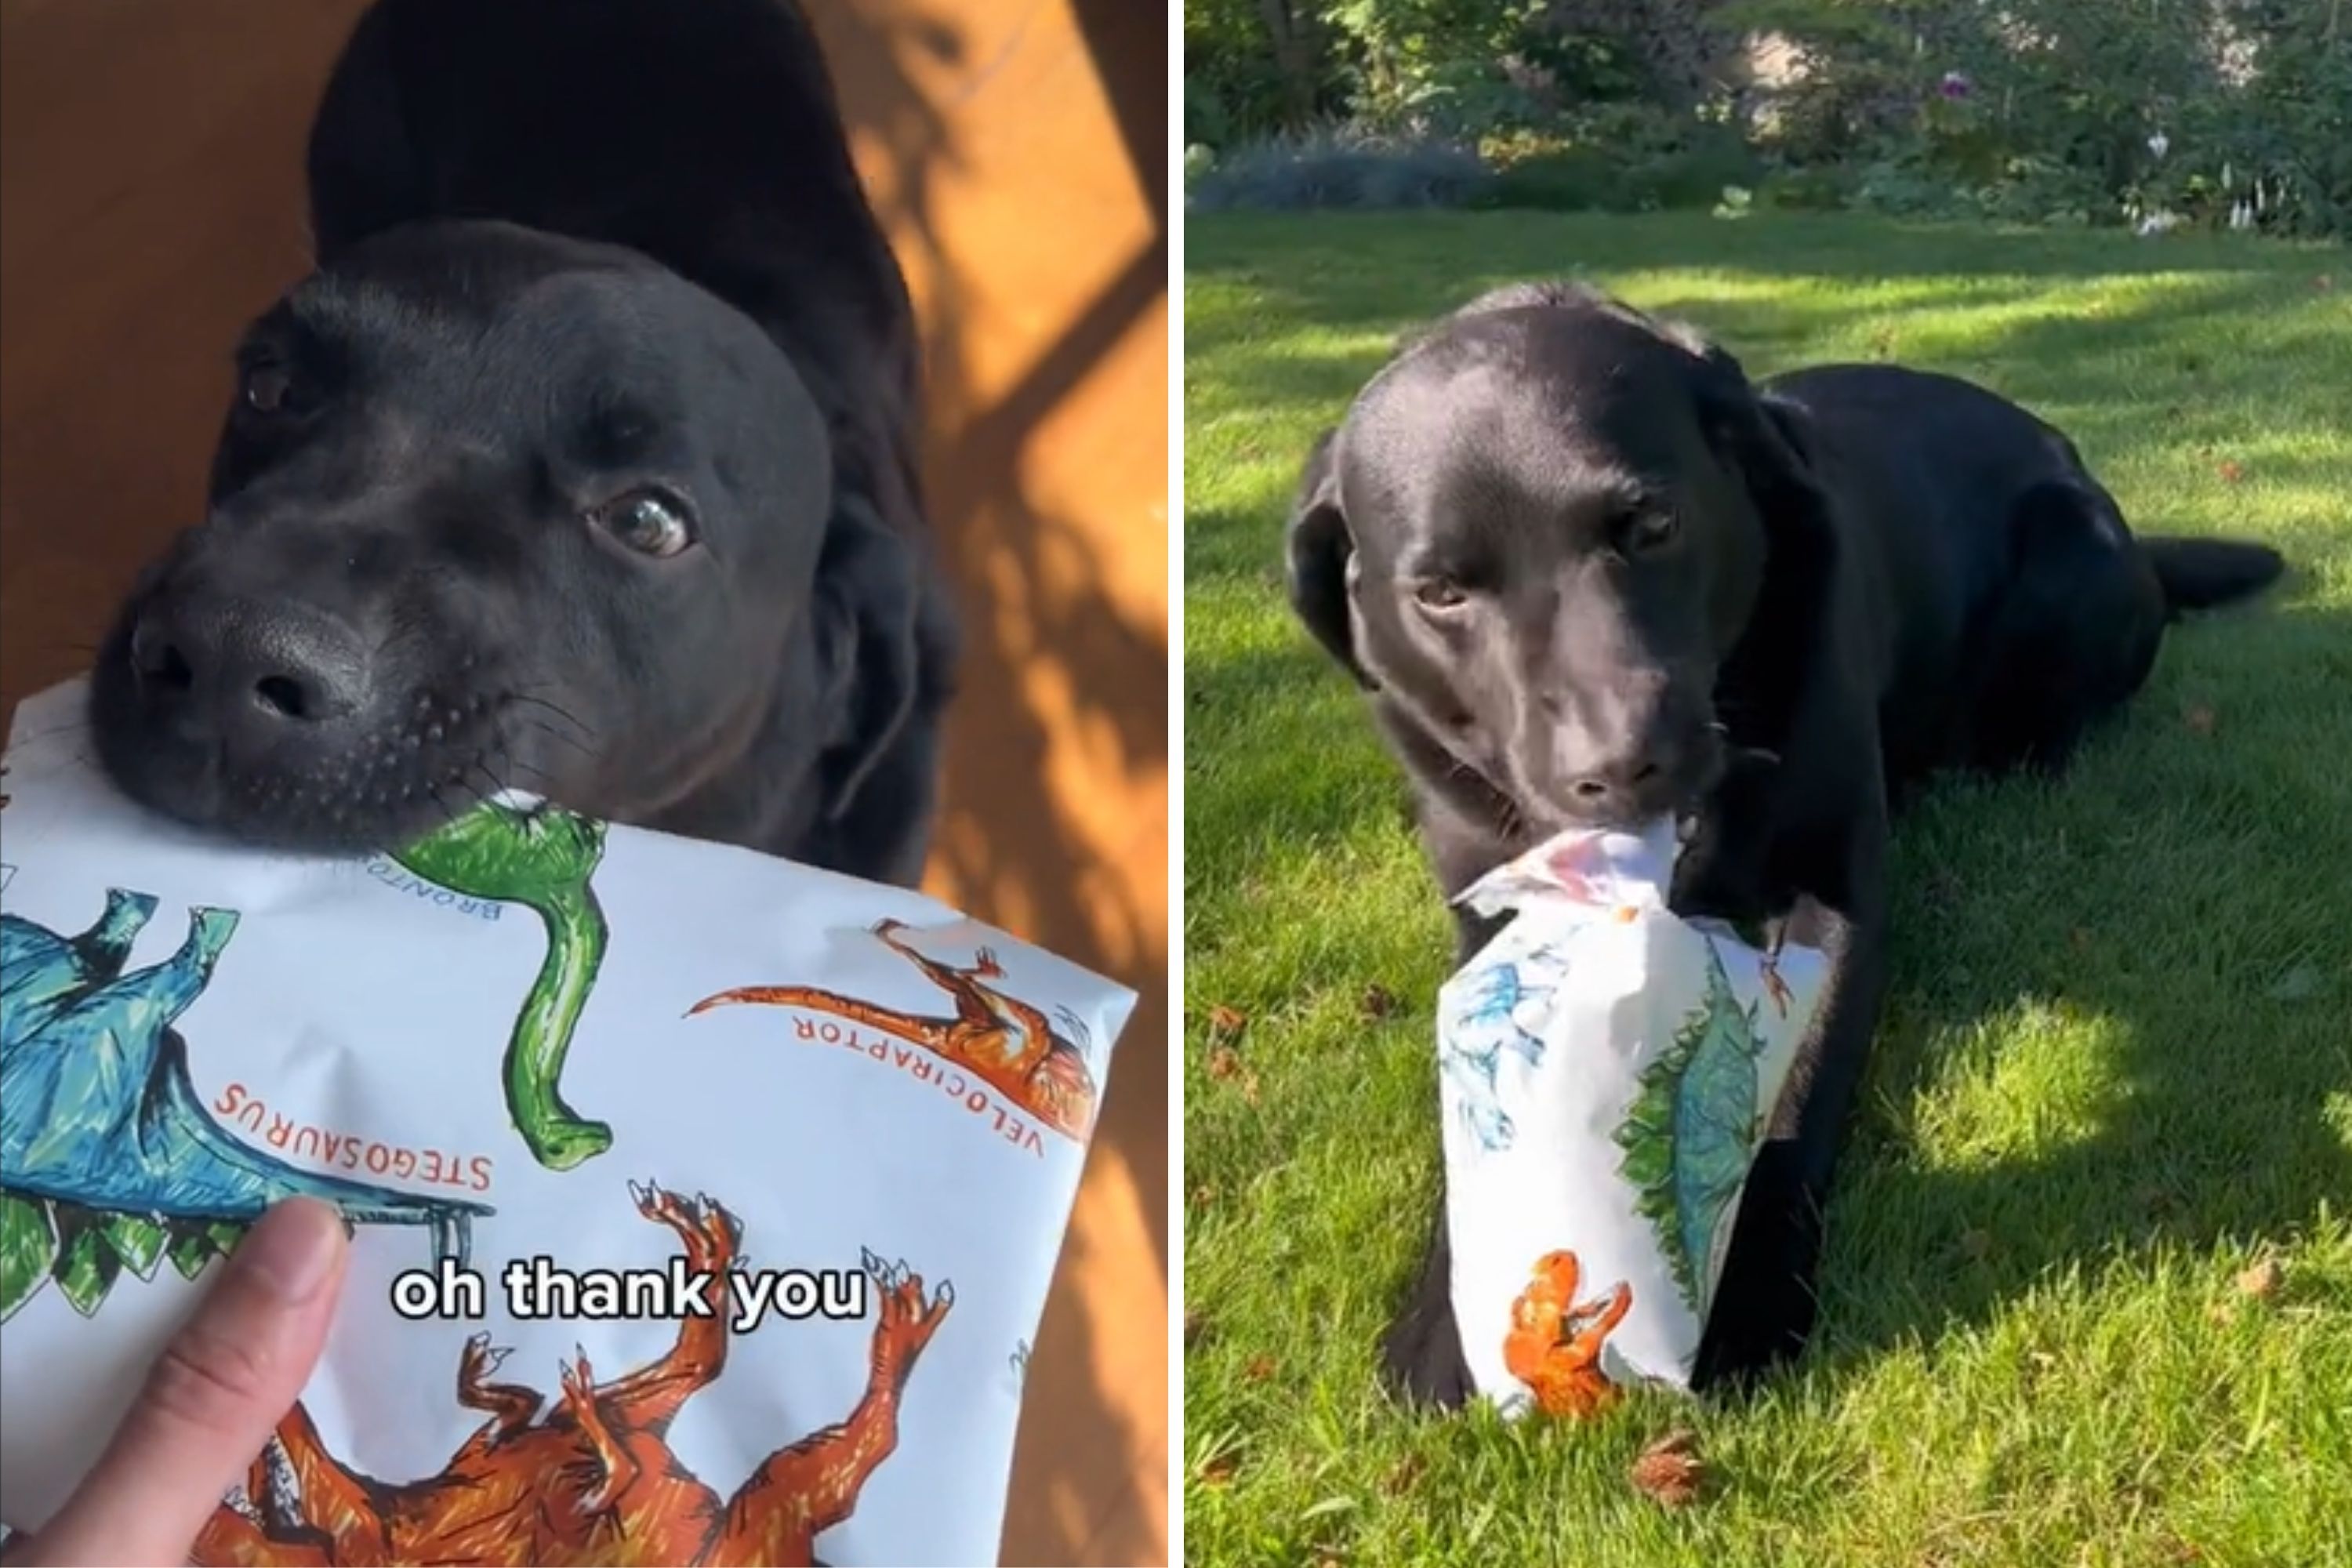 Watch How Labrador Carefully Unwraps His Present on His ‘Special Day’